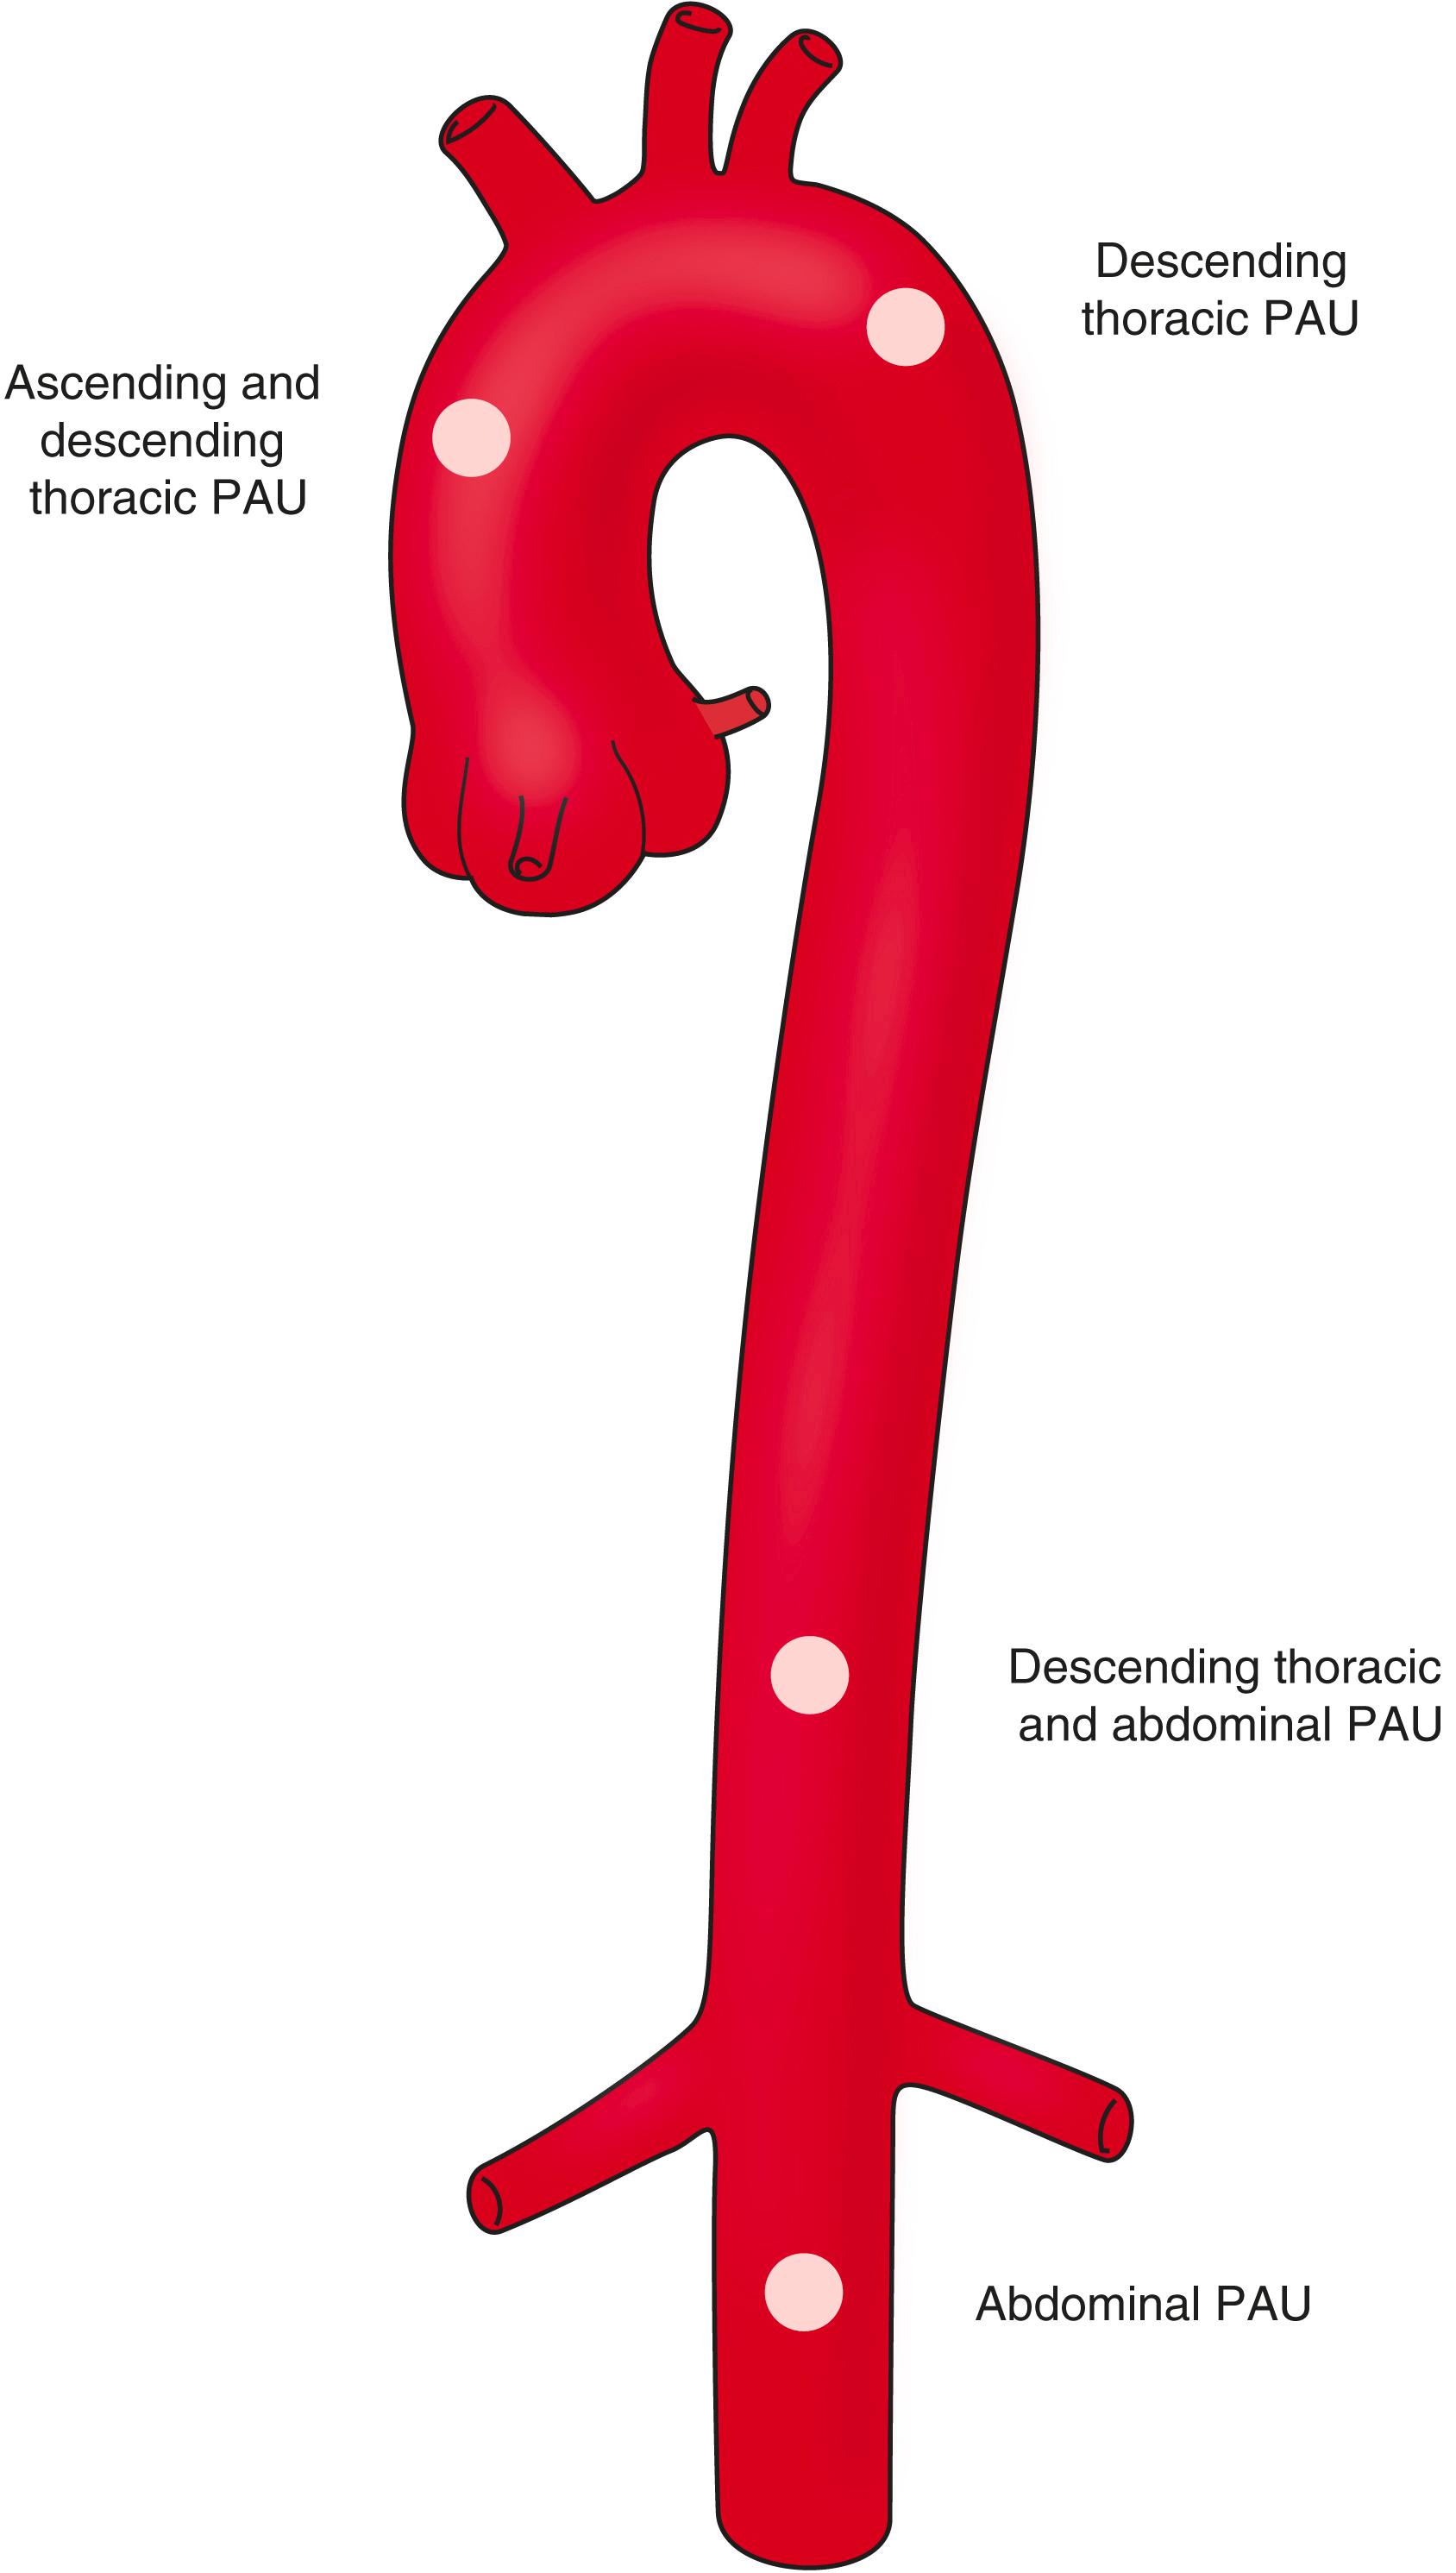 Figure 84.1, Distribution of Penetrating Aortic Ulcer (PAU) Along the Aorta and Associated Common Symptoms.